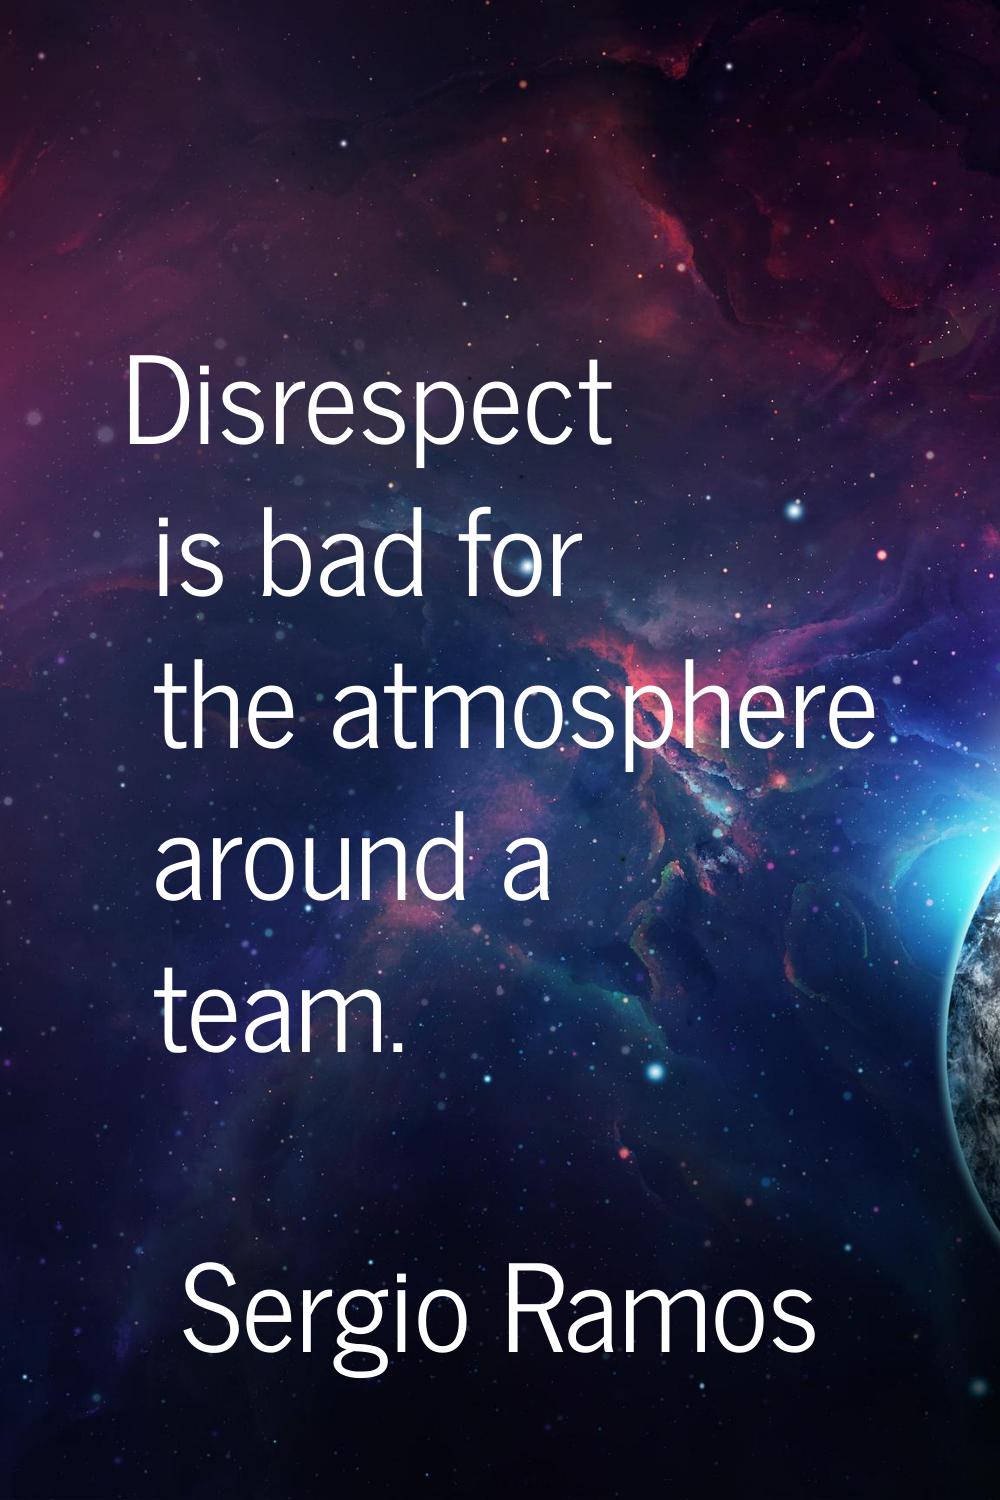 Disrespect is bad for the atmosphere around a team.